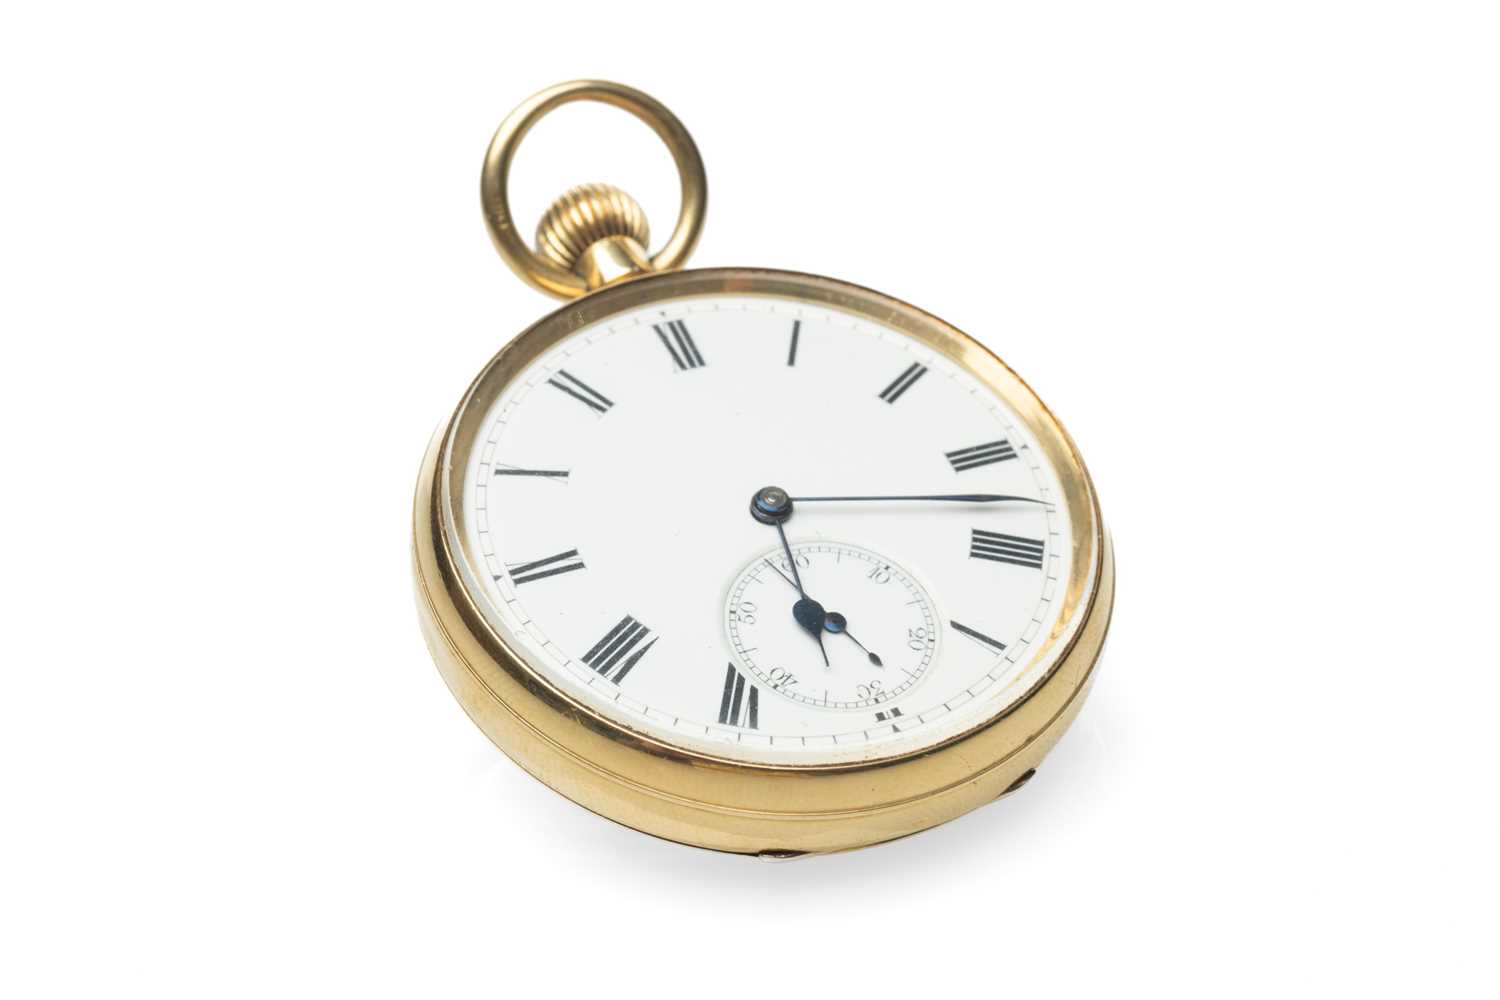 18CT GOLD OPEN FACE POCKET WATCH, white enamel dial with Roman numerals and subsidiary seconds dial, - Image 2 of 2